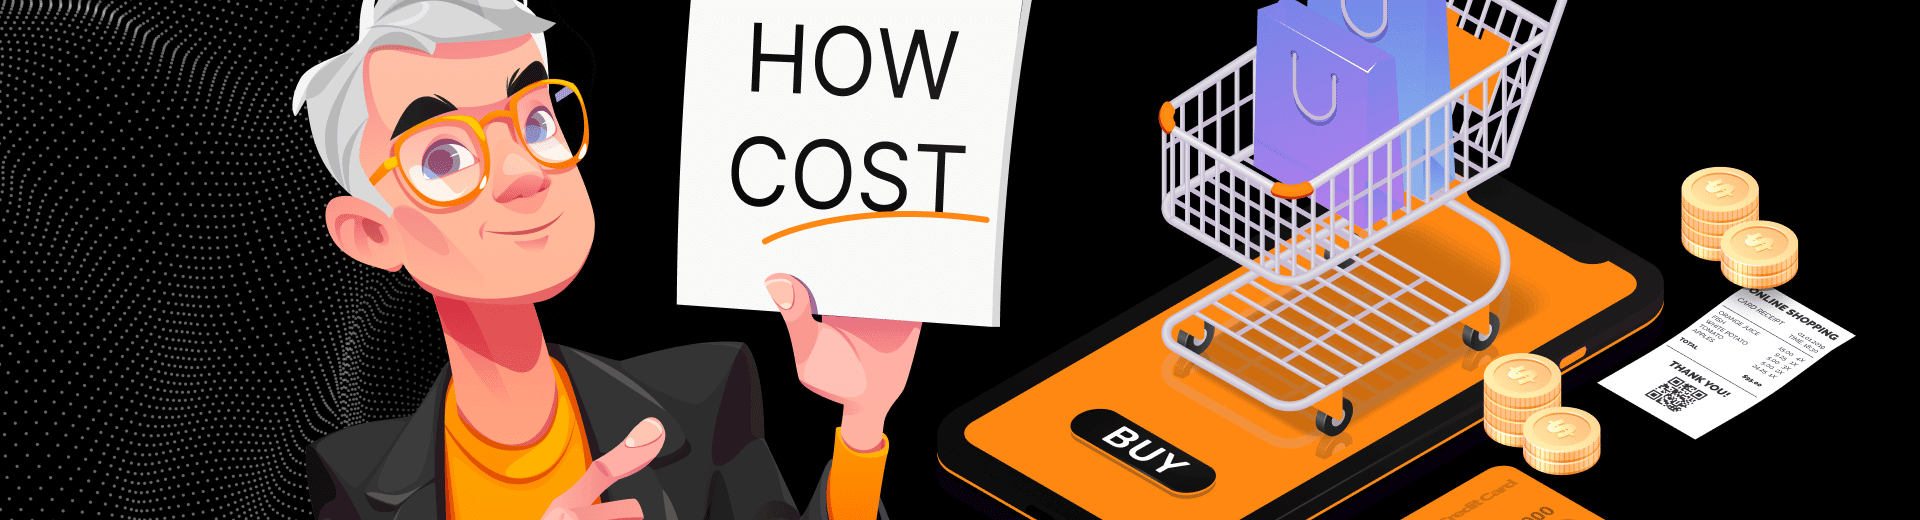 How Much Does it Cost to Build a Marketplace with Magento [Complete Guide]?